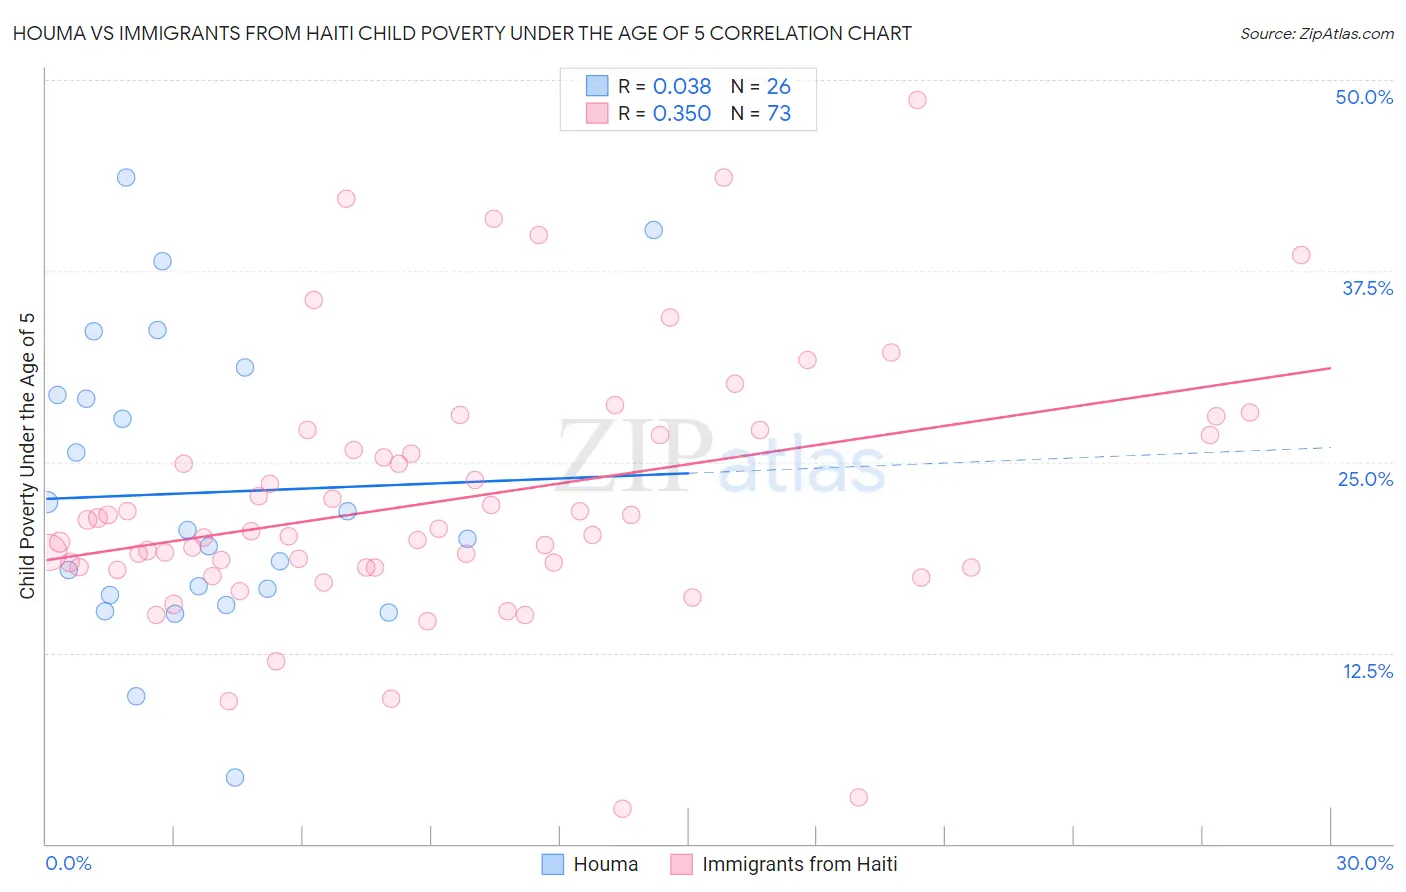 Houma vs Immigrants from Haiti Child Poverty Under the Age of 5